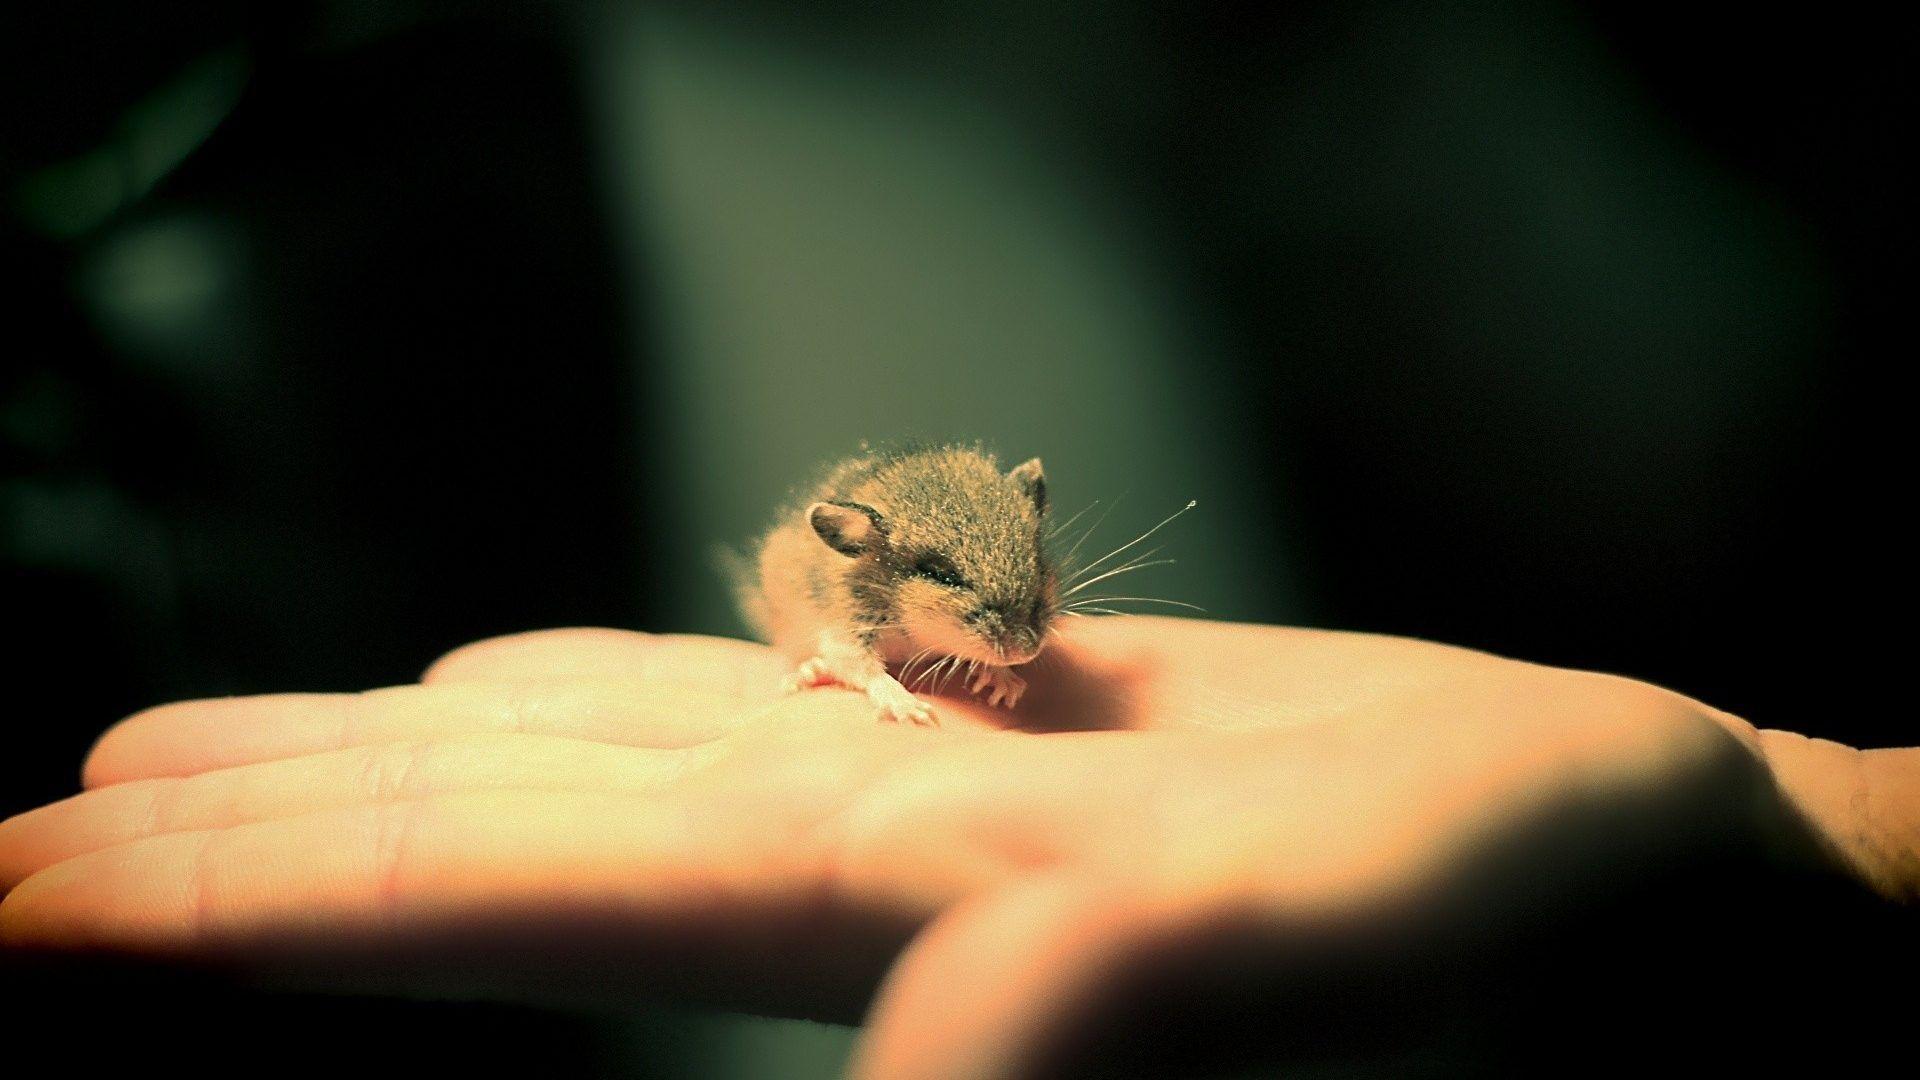 Animals: Mice Animals Hands Good Morning HD Image for HD 16:9 High